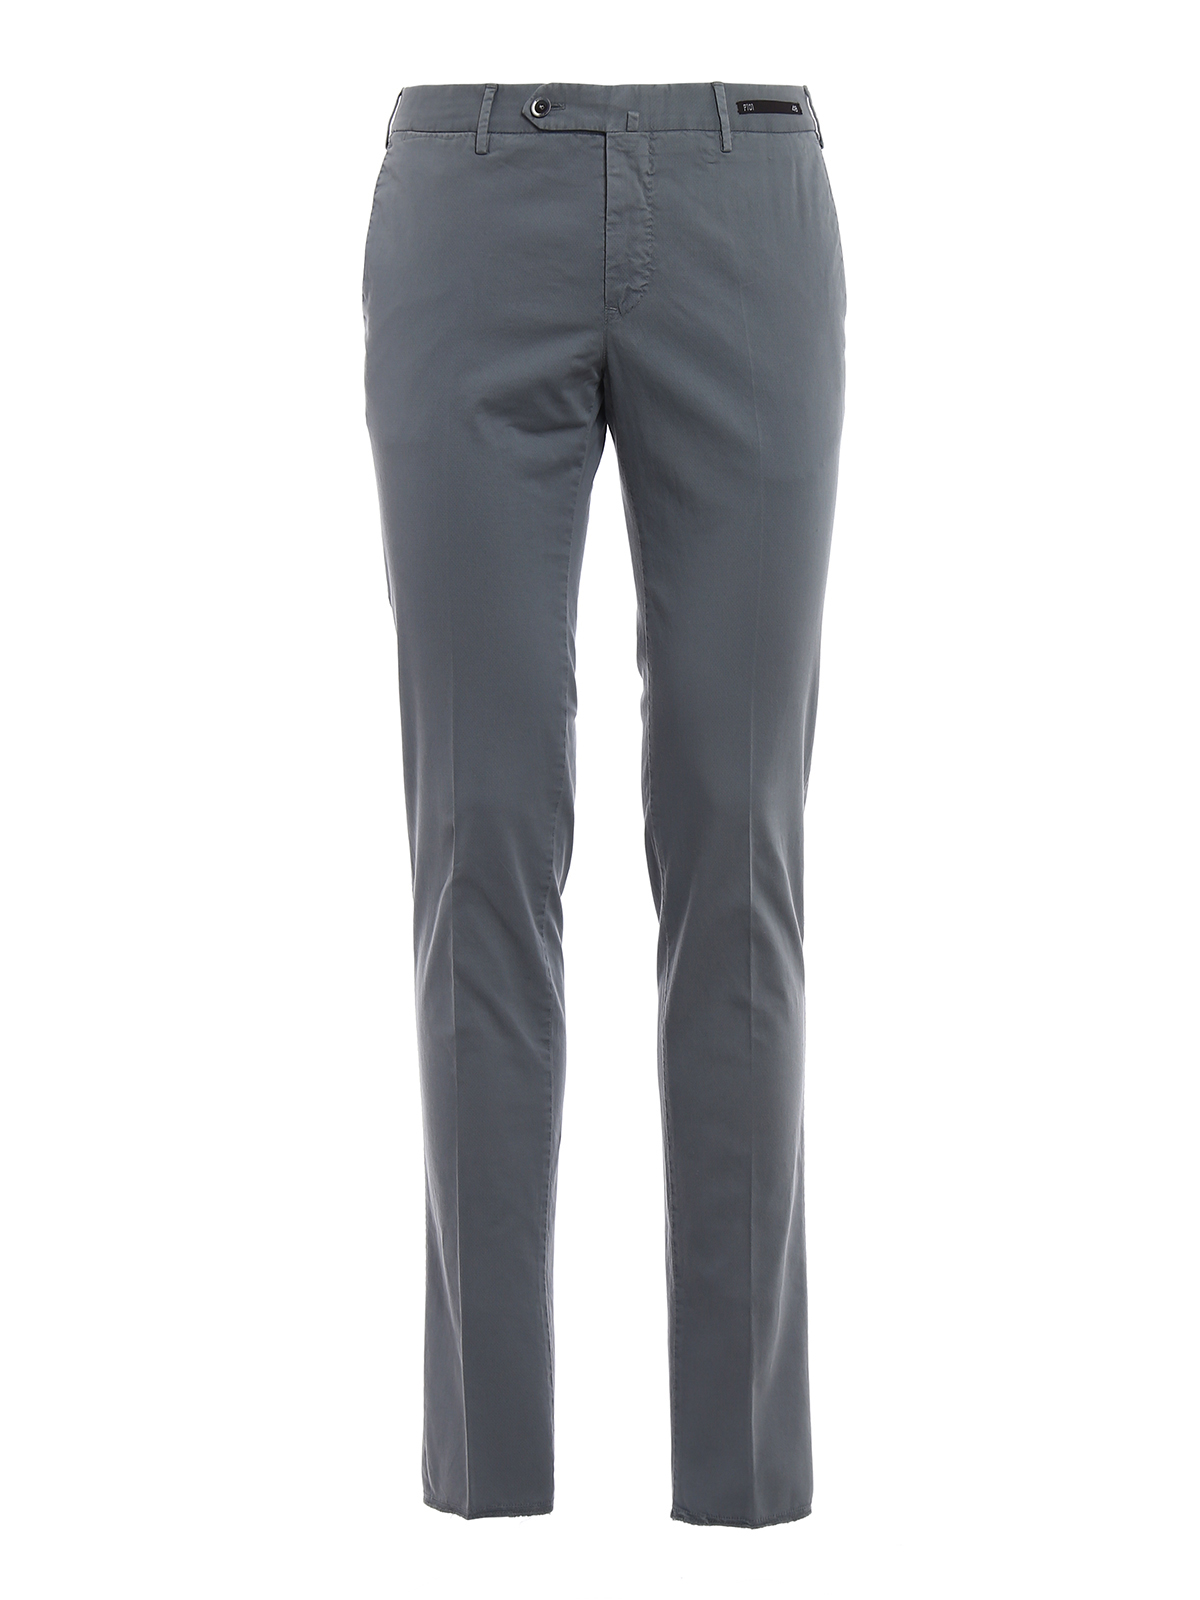 Tailored & Formal trousers Pt Torino - Spice Route grey Madras - CPDT01Z00SPRNT820333